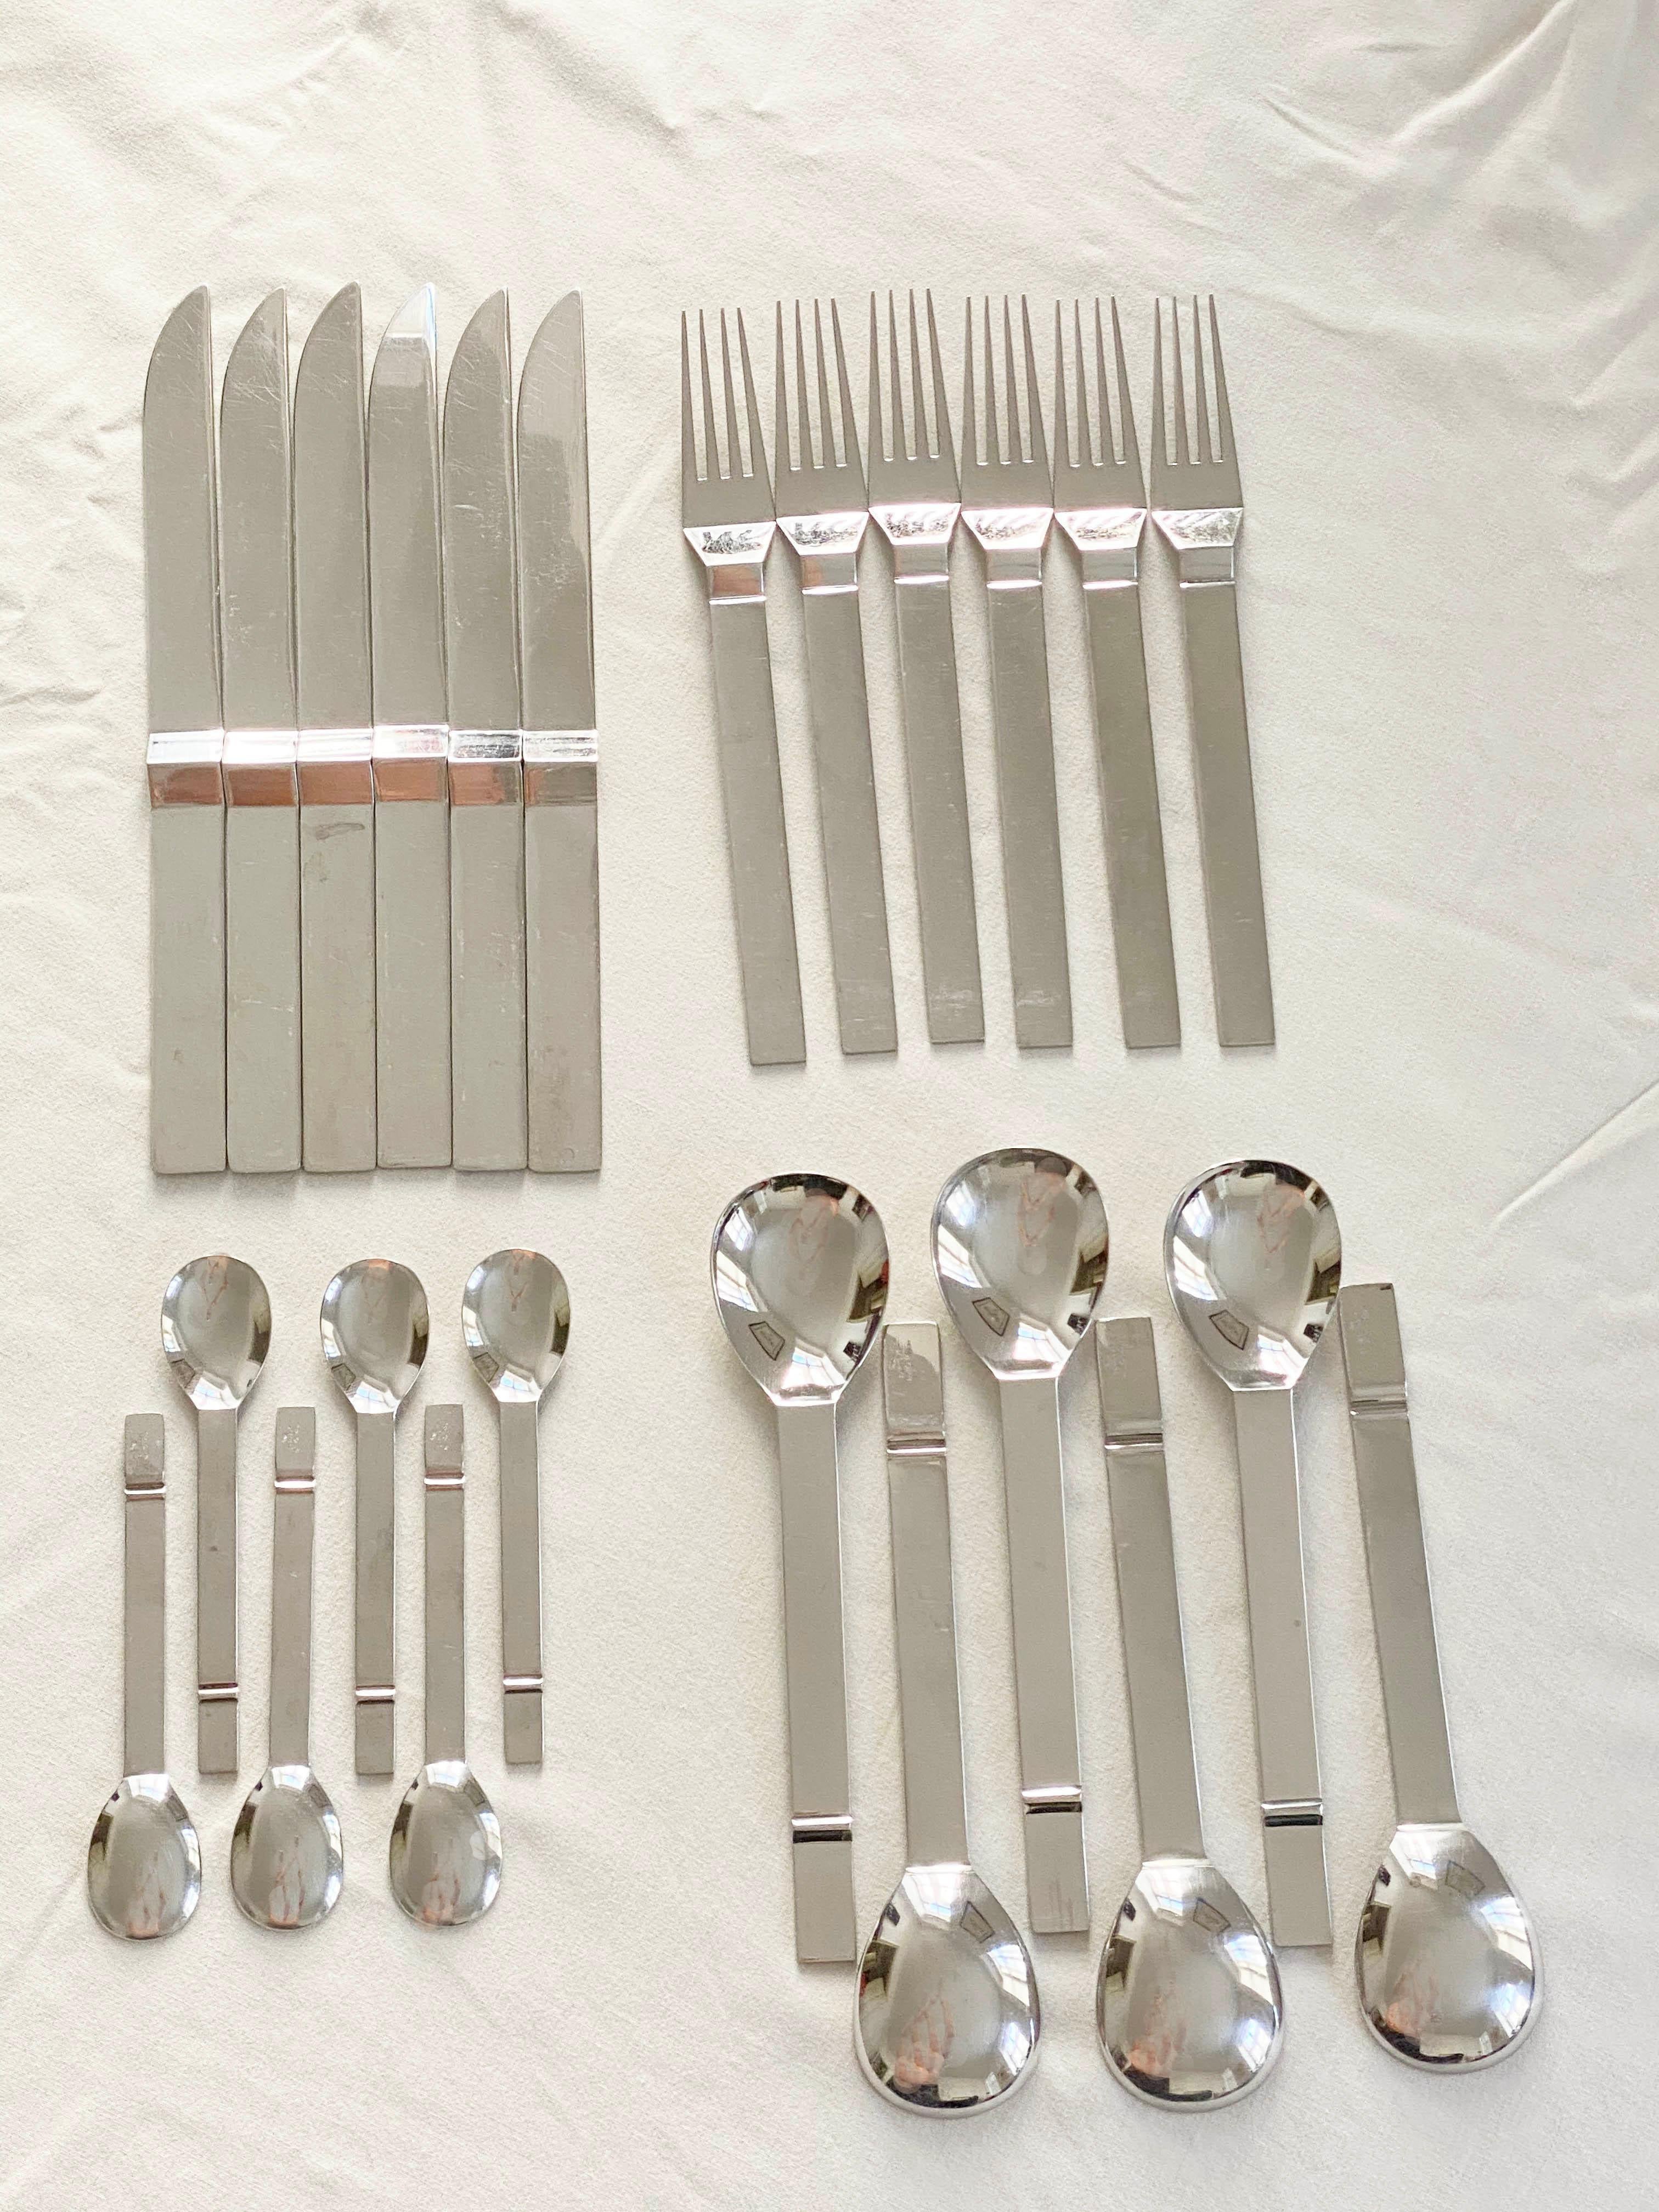 Designed by famous New York designer’s duo Bob Patino (1942-1998) and Vincente Wolf in 1991 for Berndorf, Austria. Beautiful and hard-to-find cutlery made of chrome-plated stainless steel discontinued. A set of 24 pieces

Ref. Wolfgang-Otto Bauer